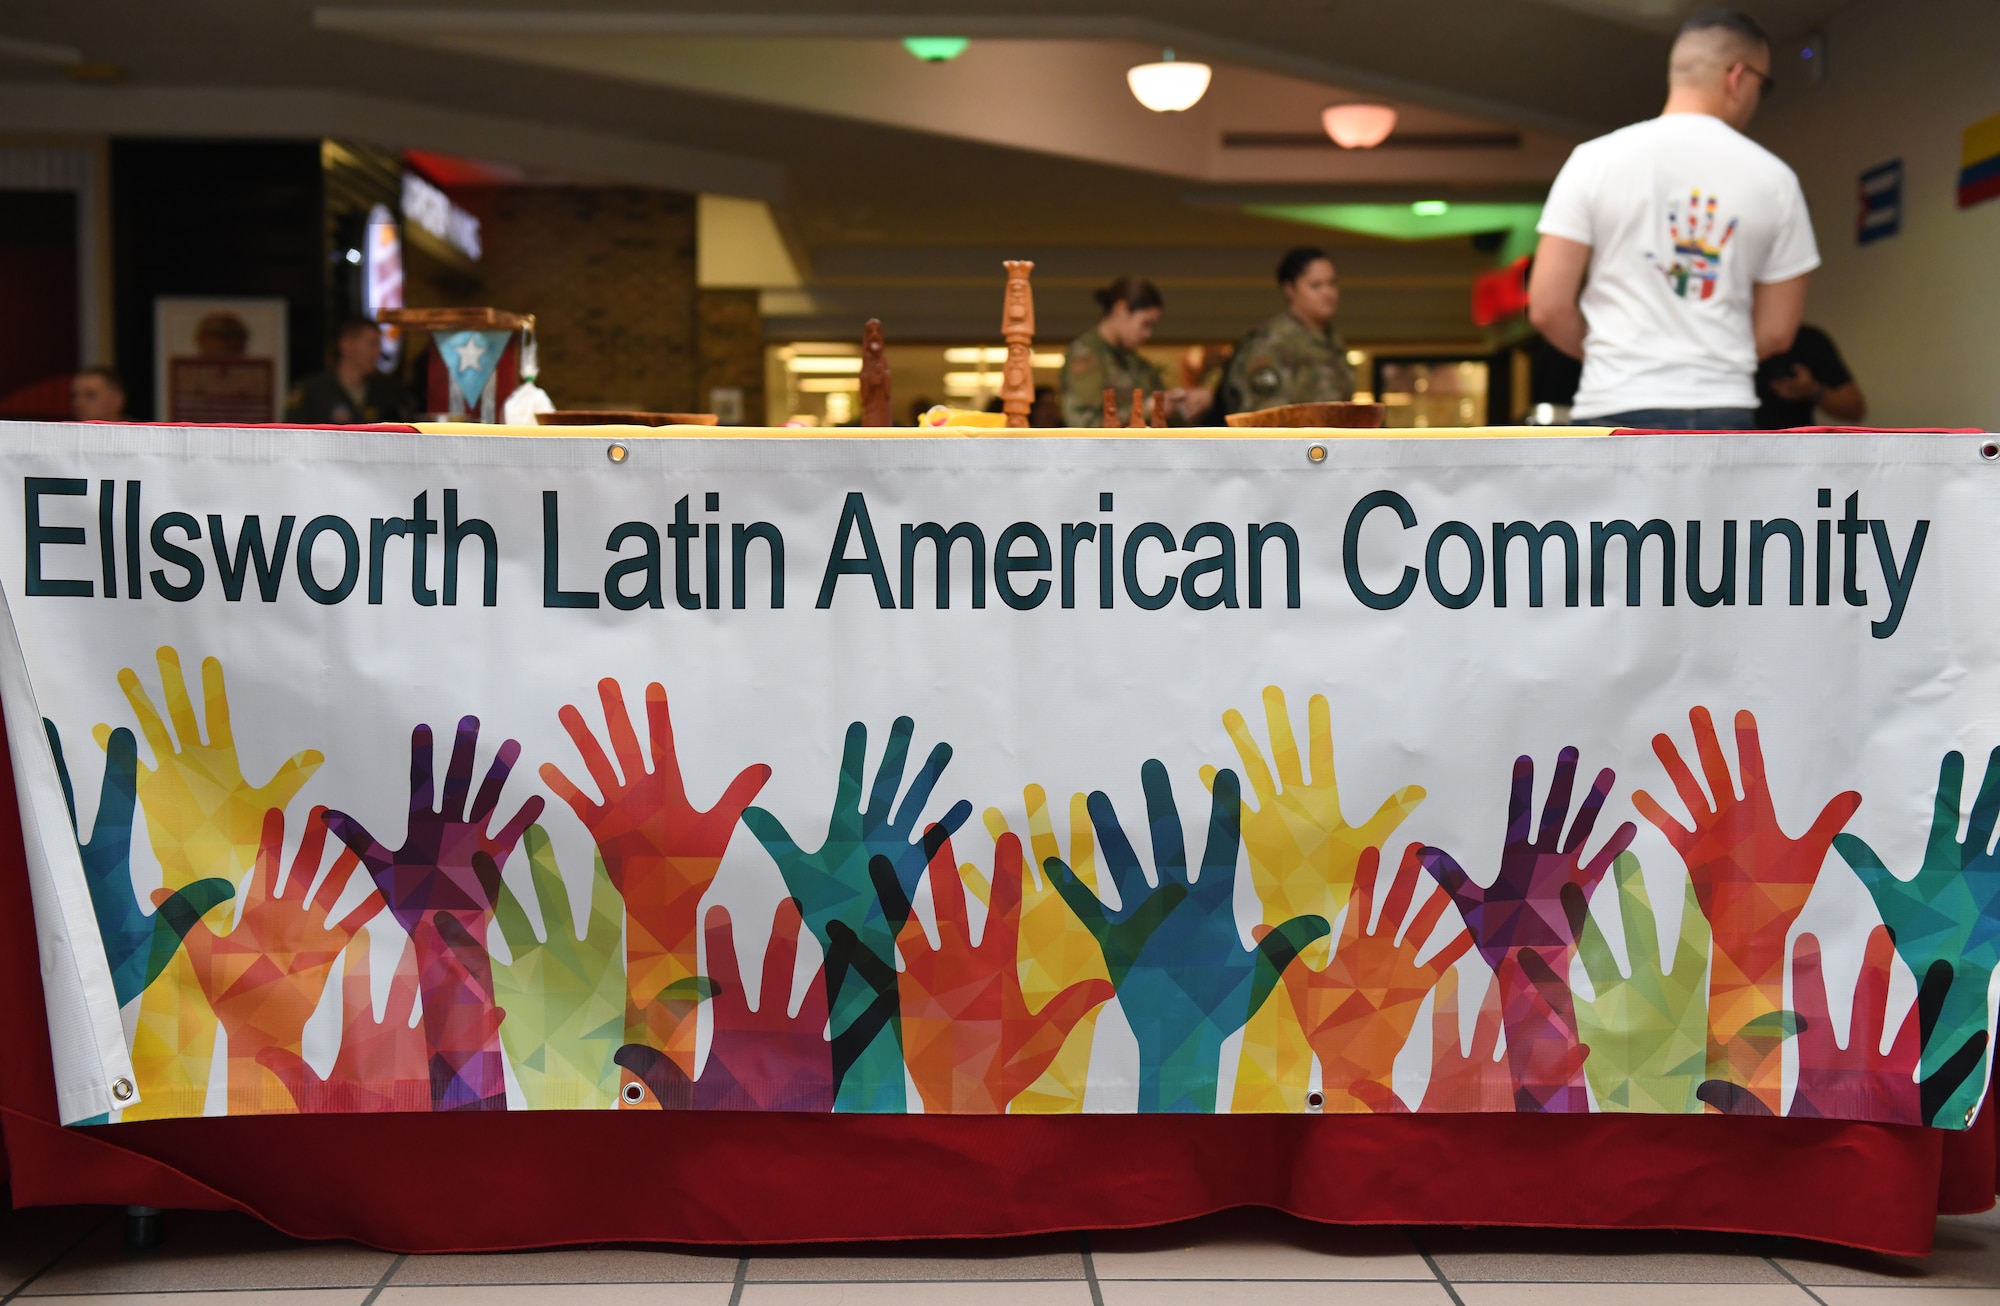 The Ellsworth Latin American Community (ELAC) sets up a ‘Taste of Latin America’ food tasting event, held at the Base Exchange food court, on Ellsworth Air Force Base, S.D., Sept. 16, 2019. The event kicked off the beginning of National Hispanic Heritage Month, which runs from Sept. 15 through Oct. 15. (U.S. Air Force photo by Airman 1st Class Christina Bennett)